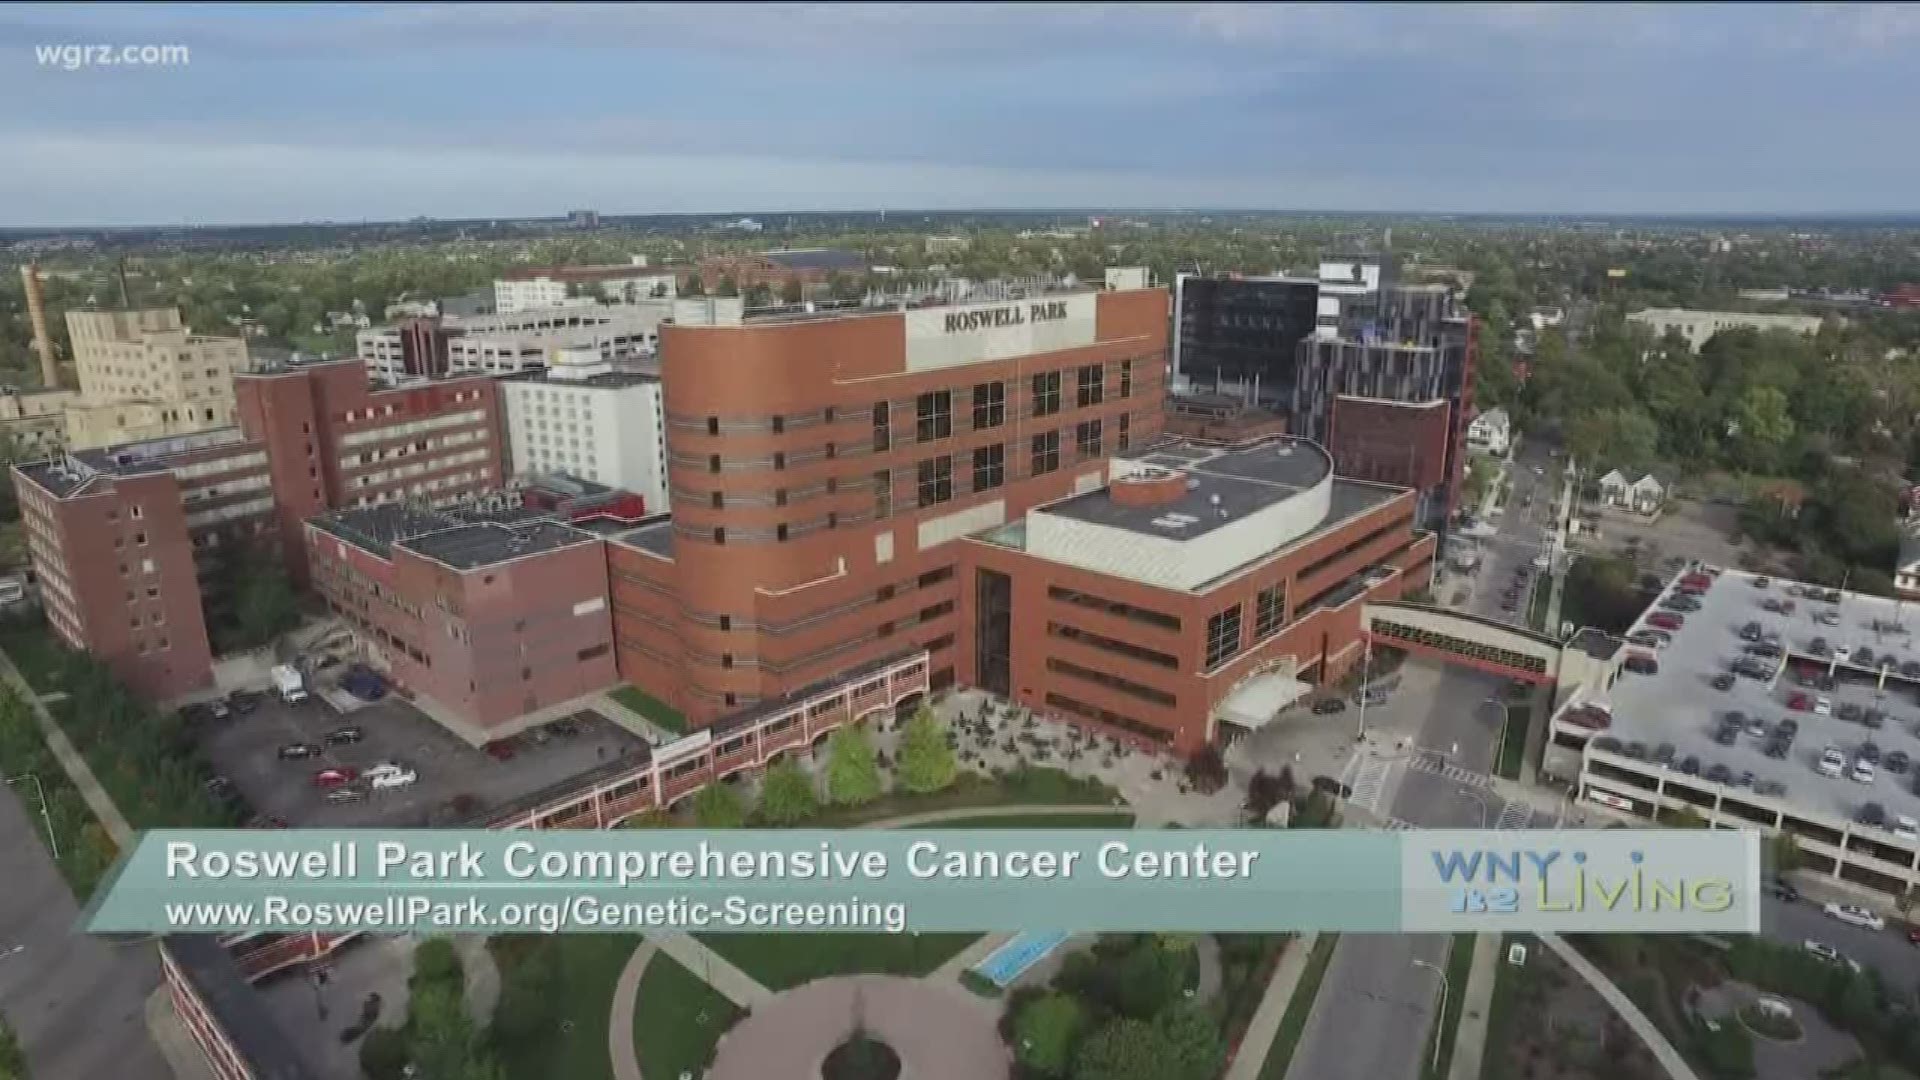 WNY Living - December 28 - Roswell Park Comprehensive Cancer Center (THIS VIDEO IS SPONSORED BY ROSWELL PARK COMPREHENSIVE CANCER CENTER)